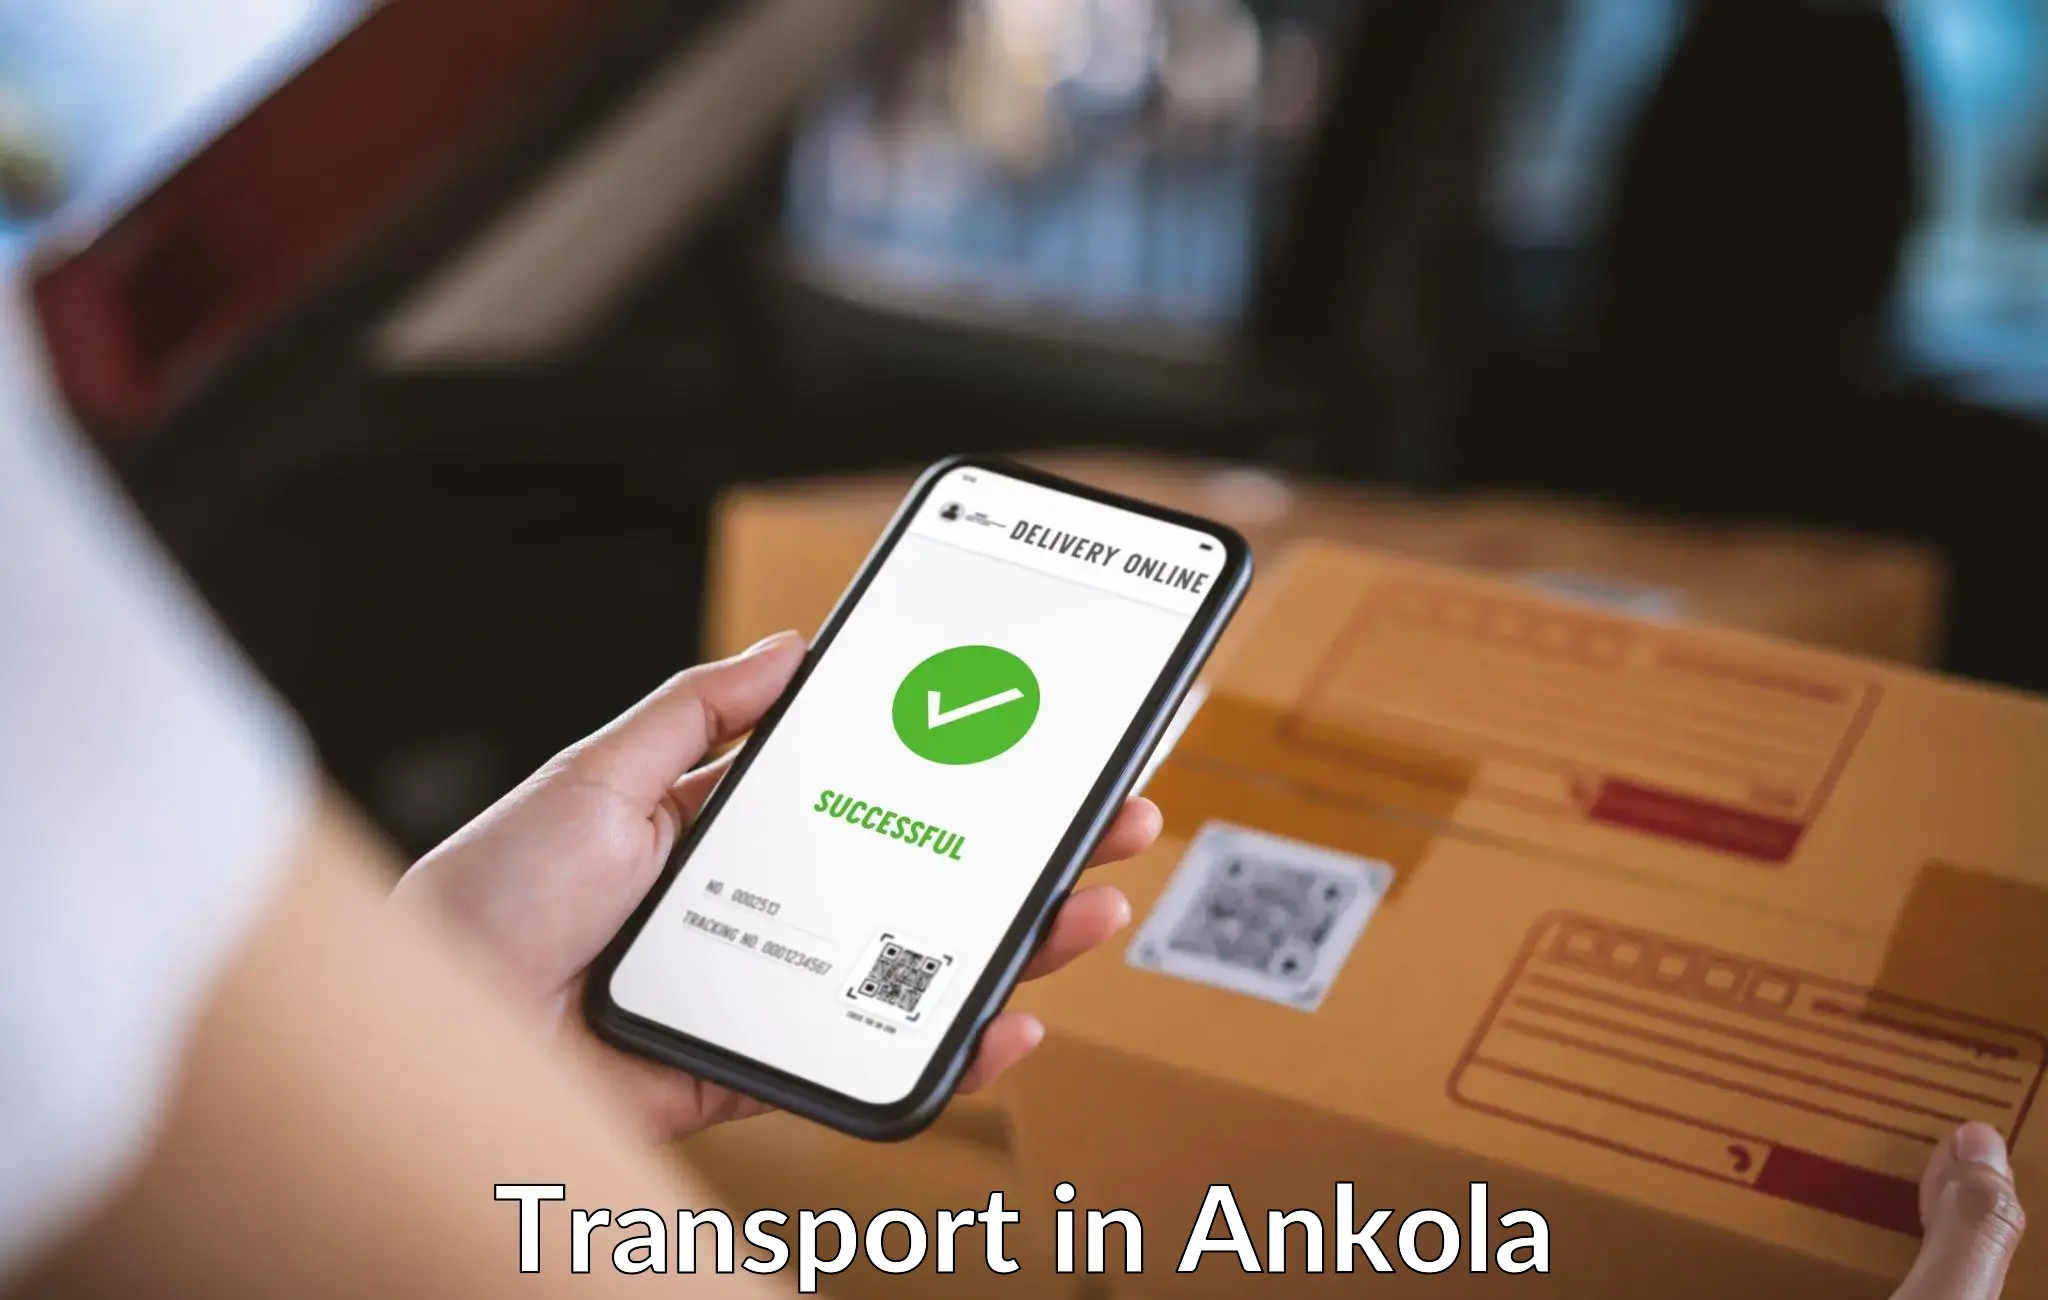 Road transport services in Ankola